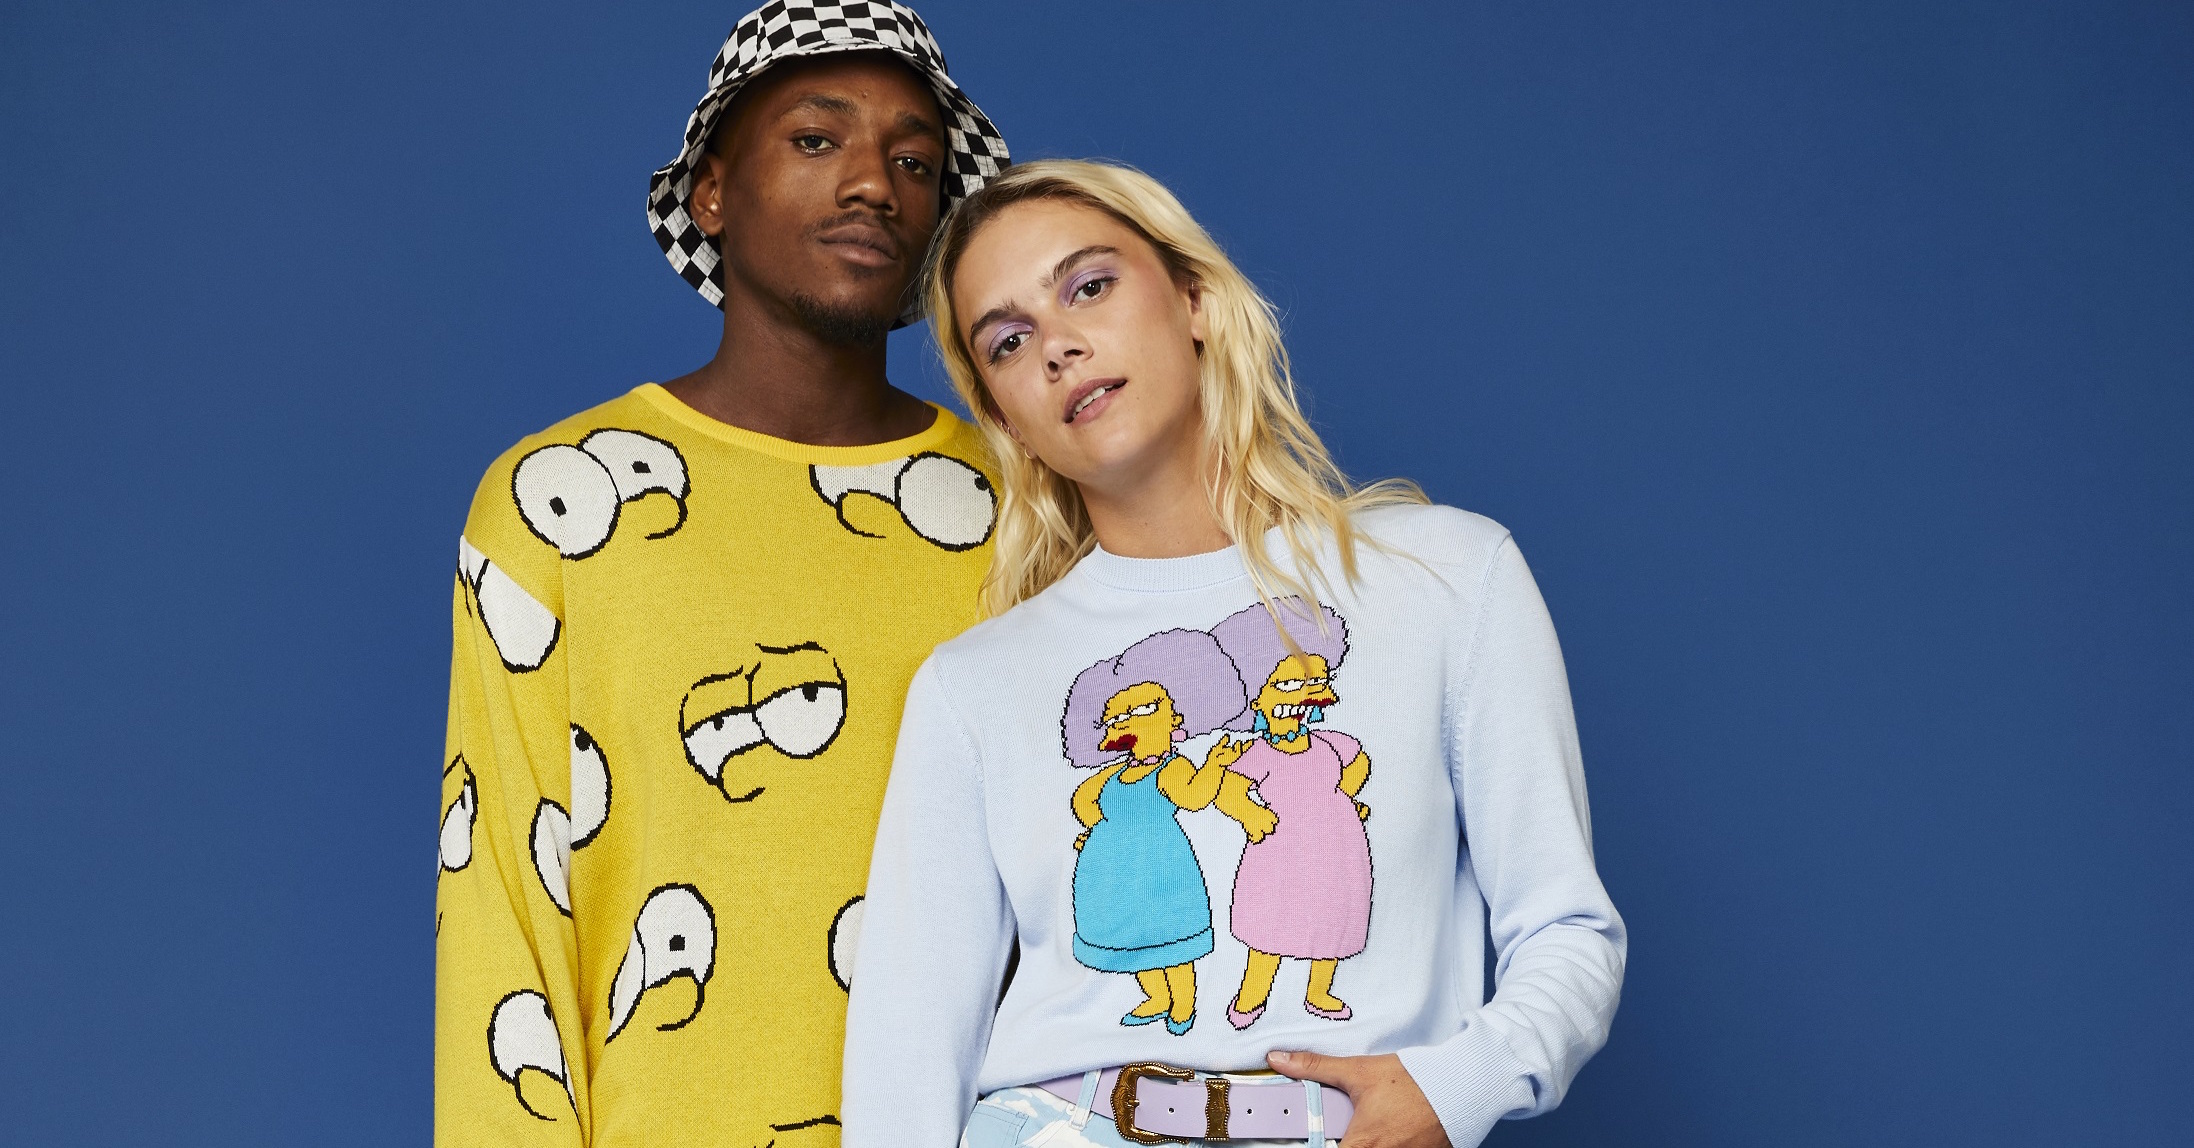 ASOS is dropping a ‘Simpsons’ streetwear collection